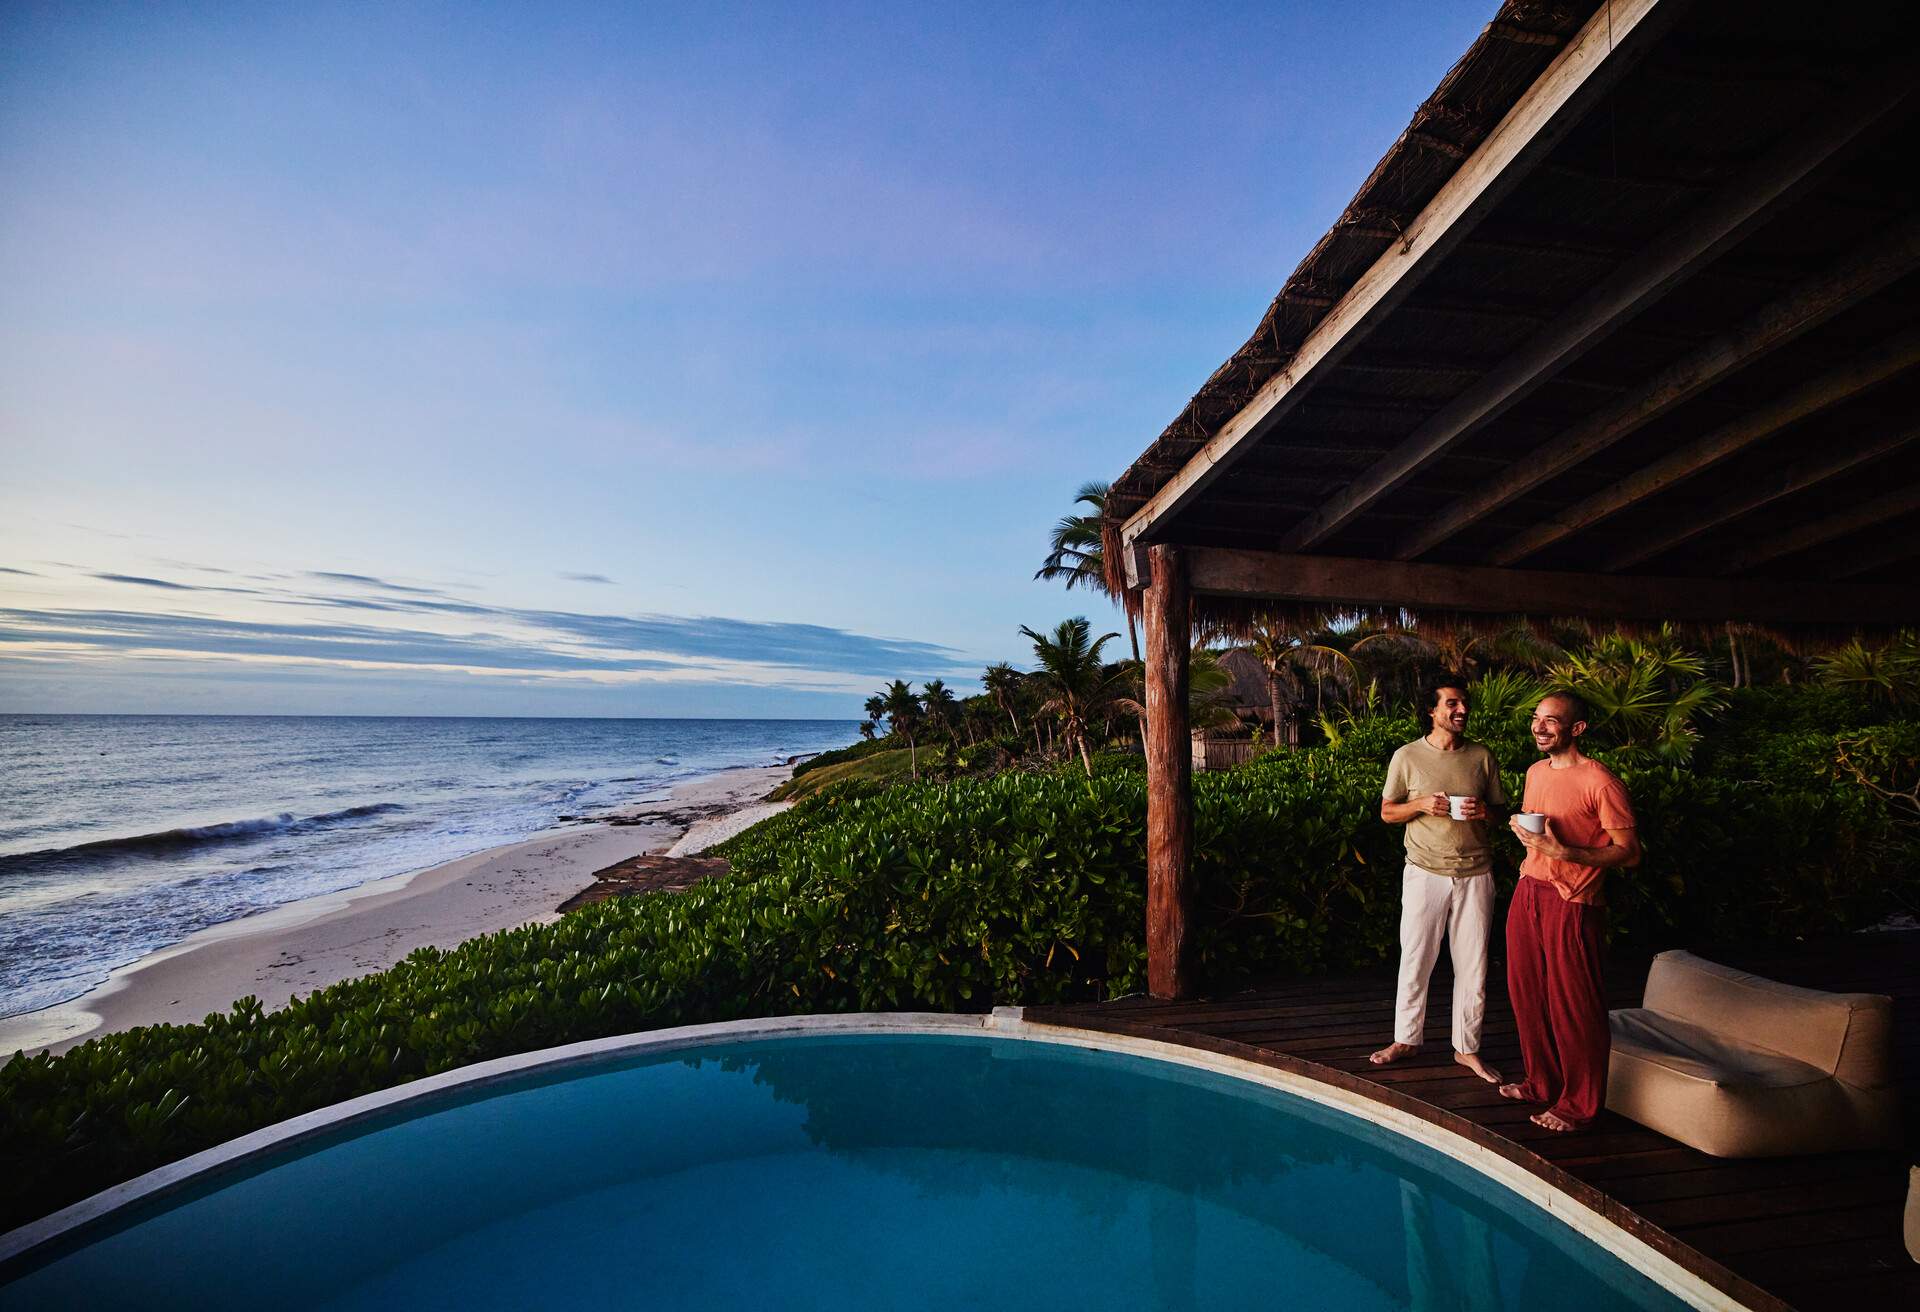 Gay couple standing poolside watching sunrise at luxury tropical villa overlooking beach and ocean, Mexico